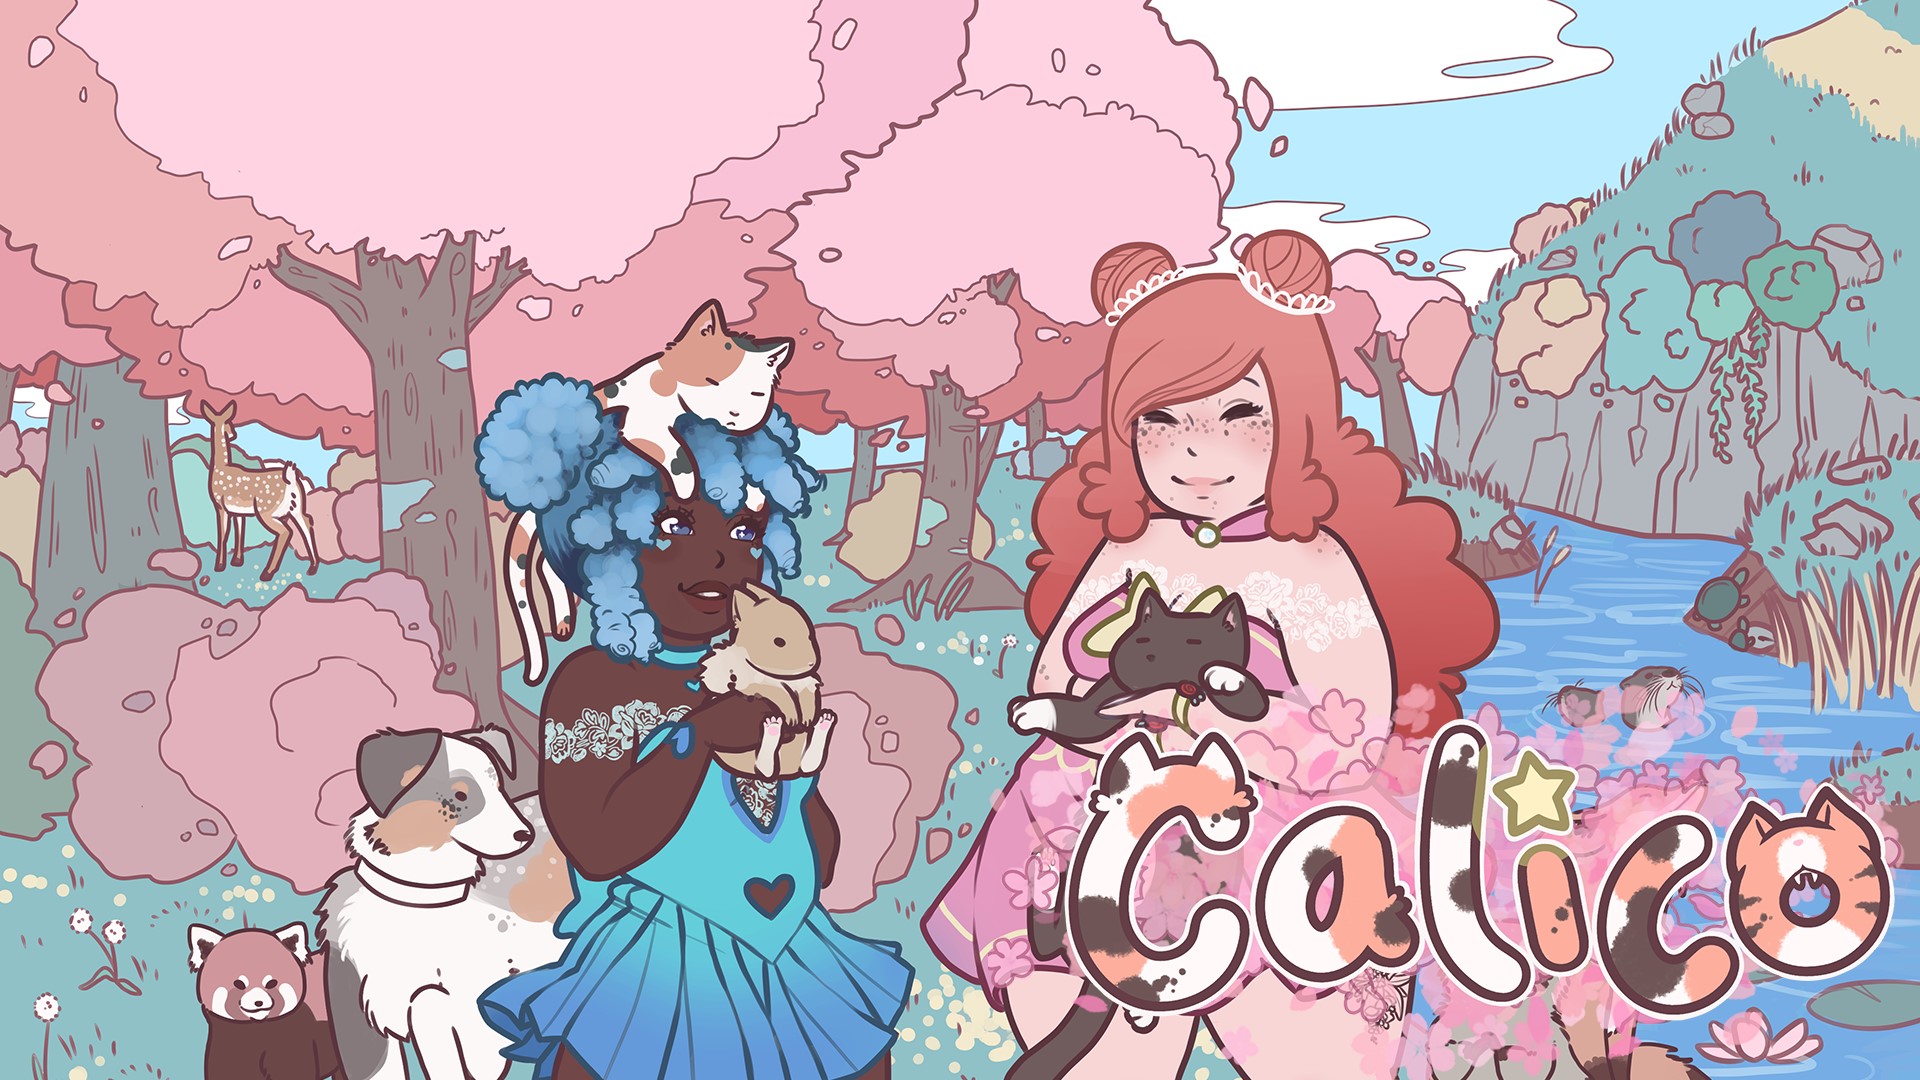  Pastel  hued cat  caf  paradise Calico is now available on 